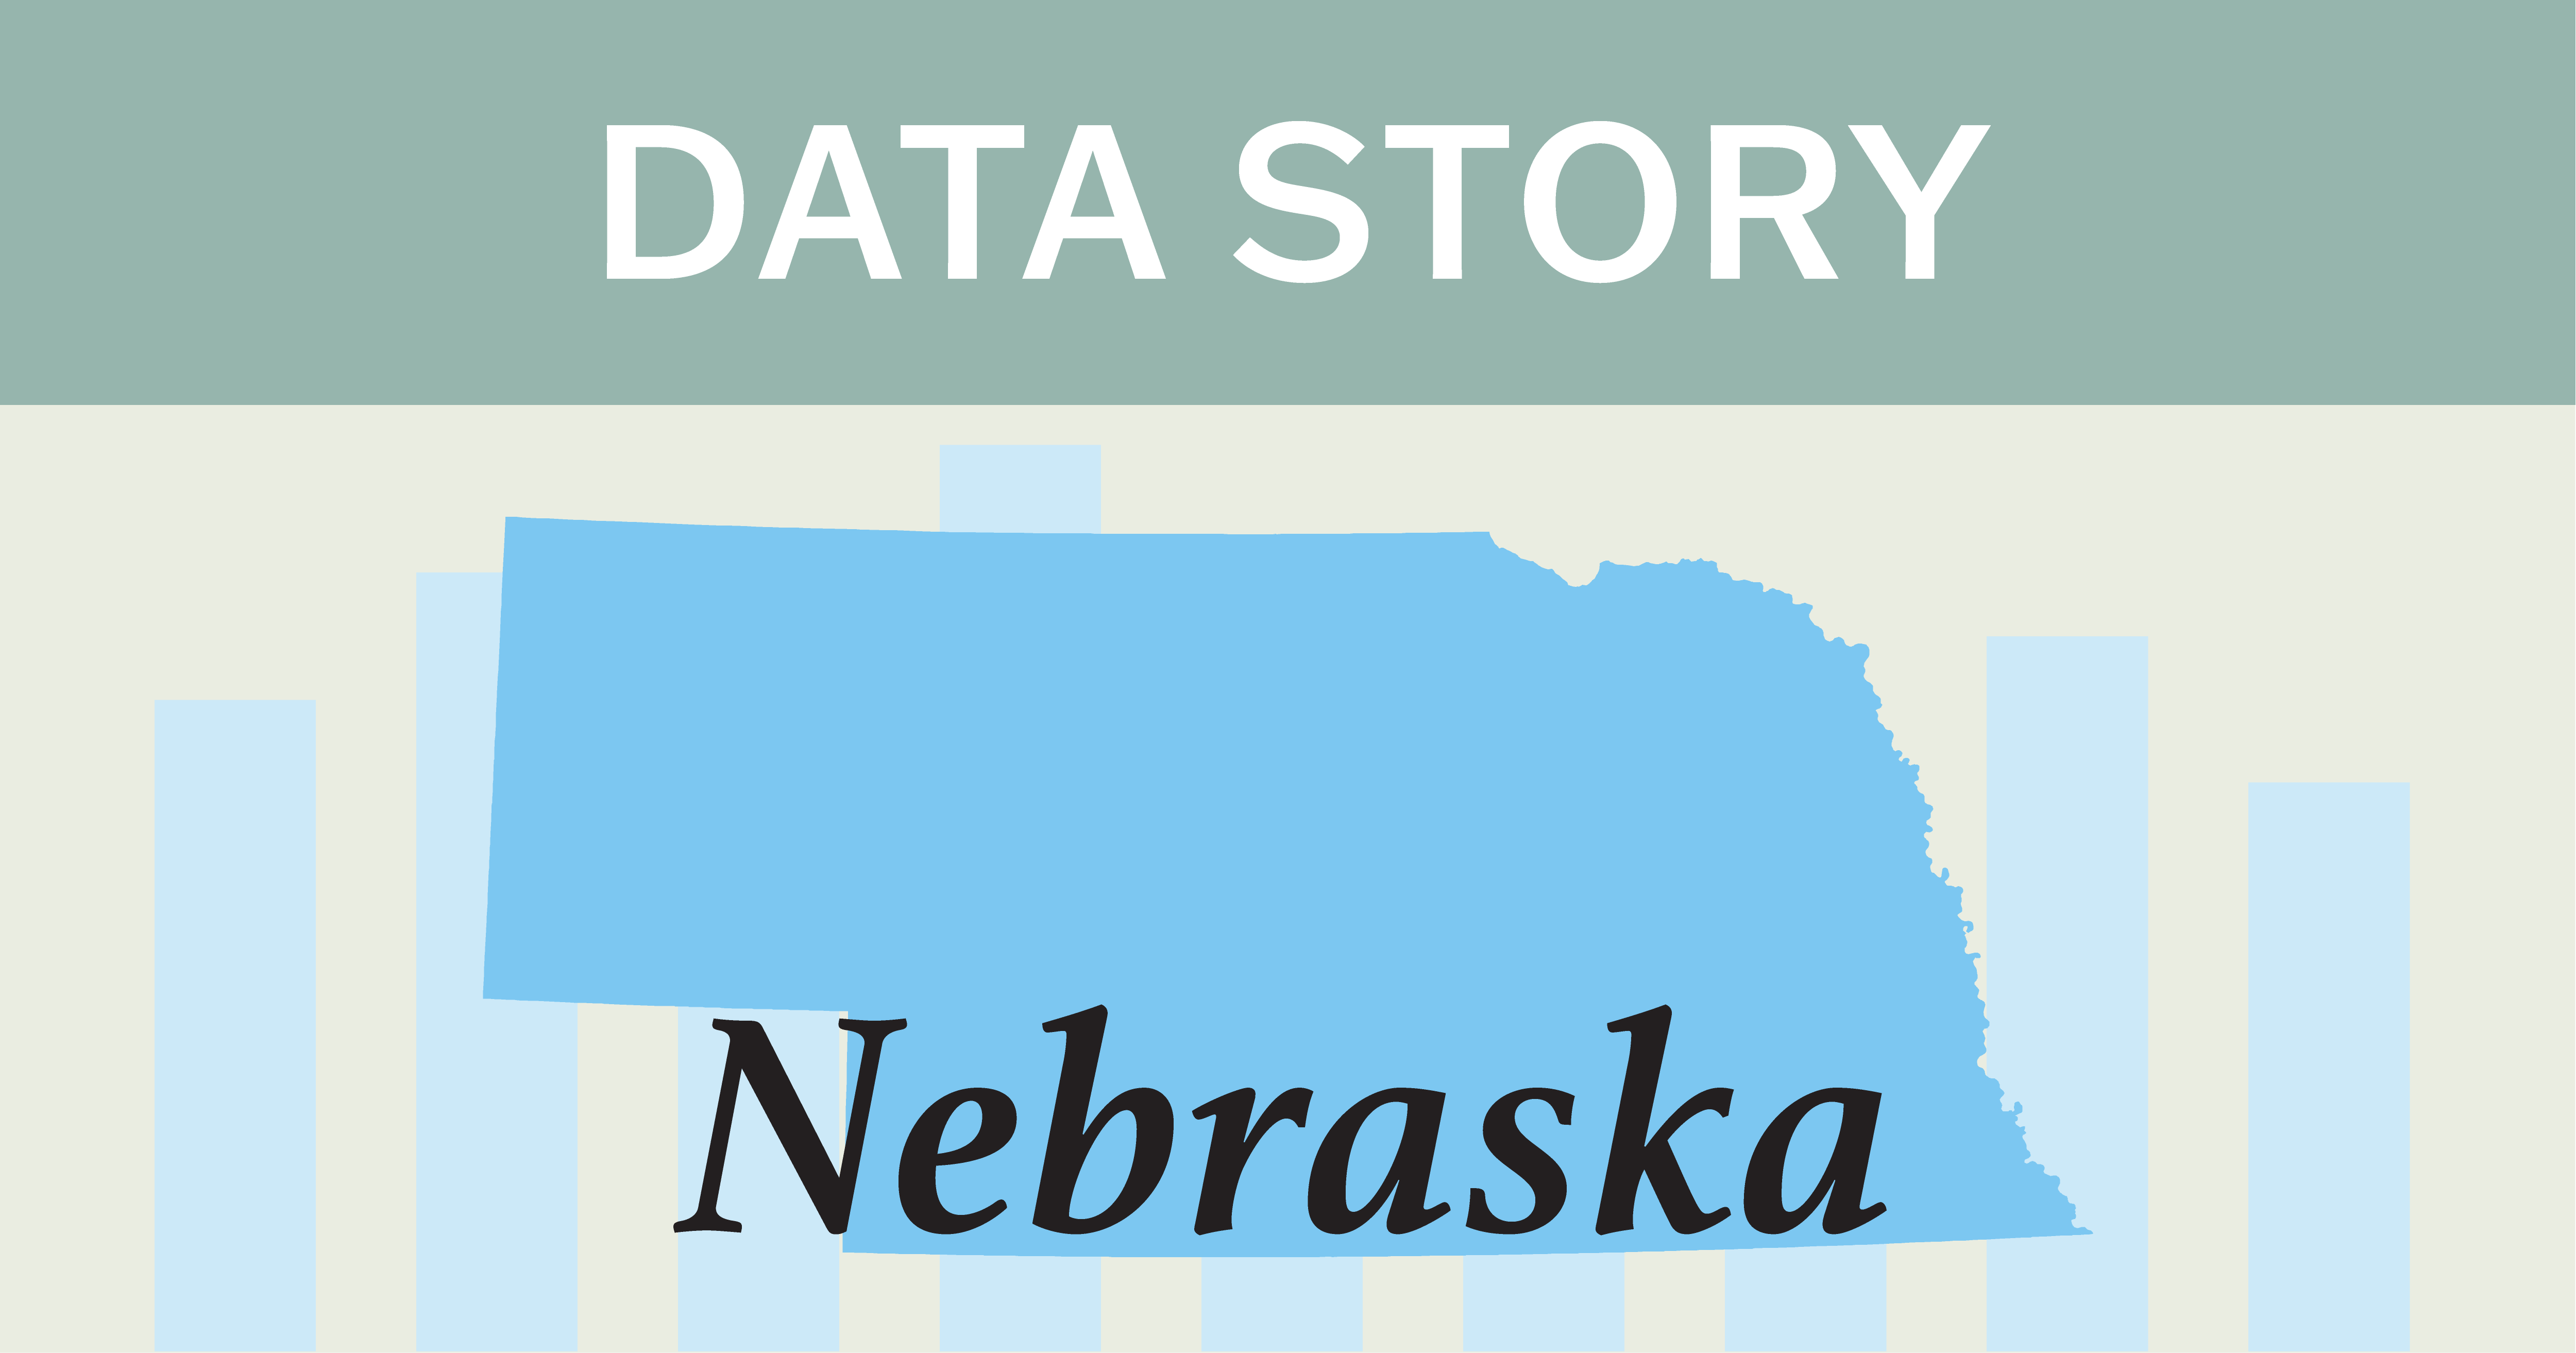 Outline of the state of Nebraska over a bar chart.